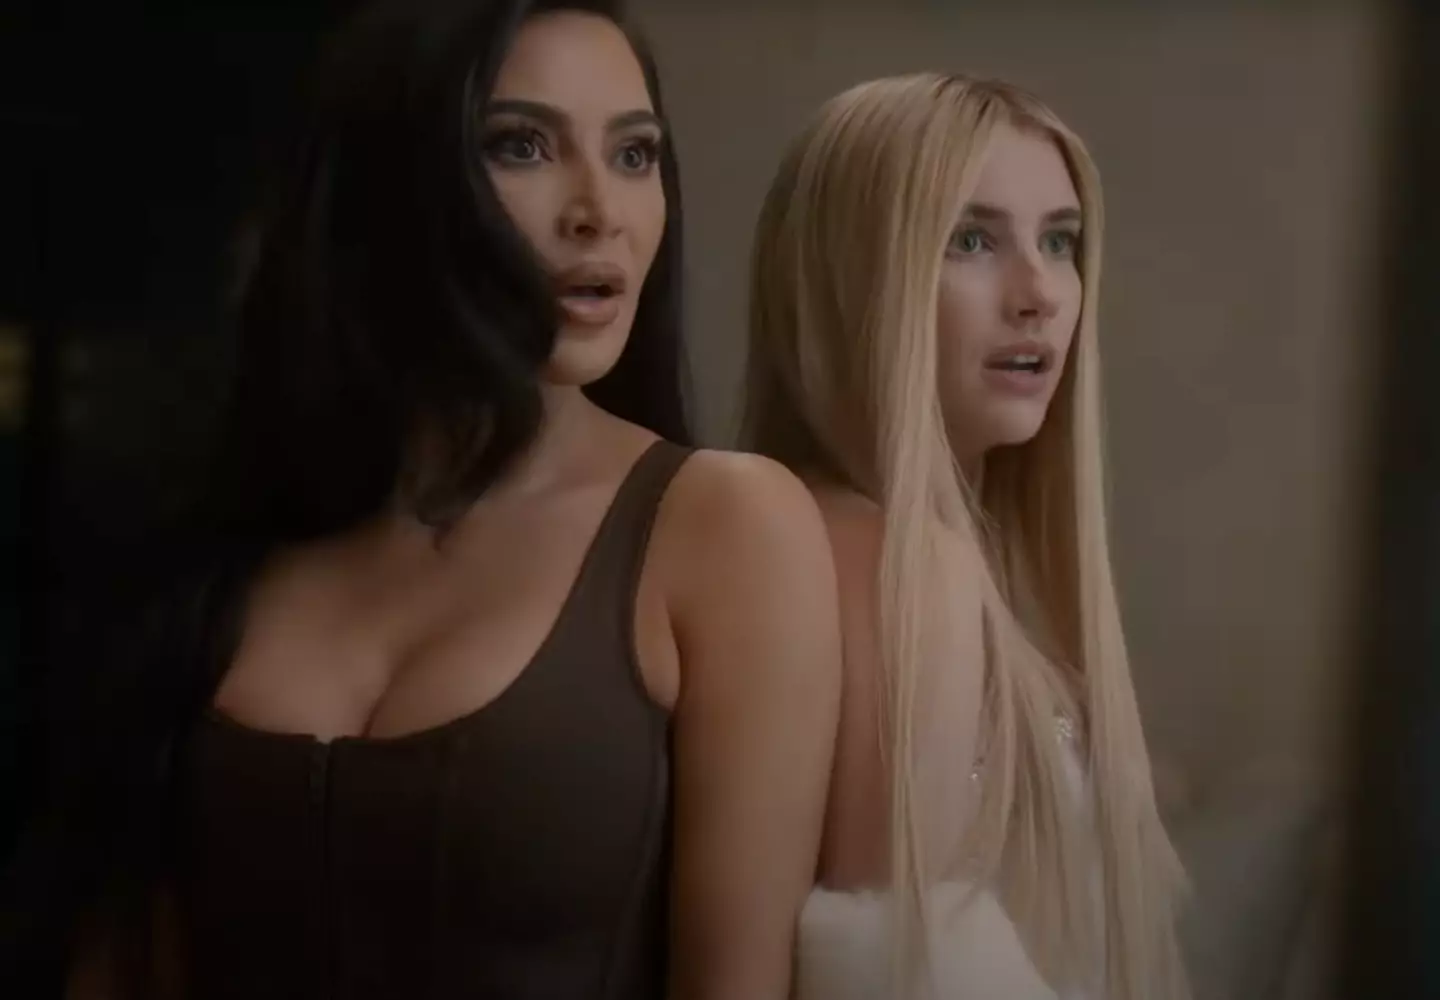 The twelfth season of the American horror anthology series American Horror Story features regular  Emma Roberts alongside two big newcomers Kim Kardashian and Cara Delevingne.